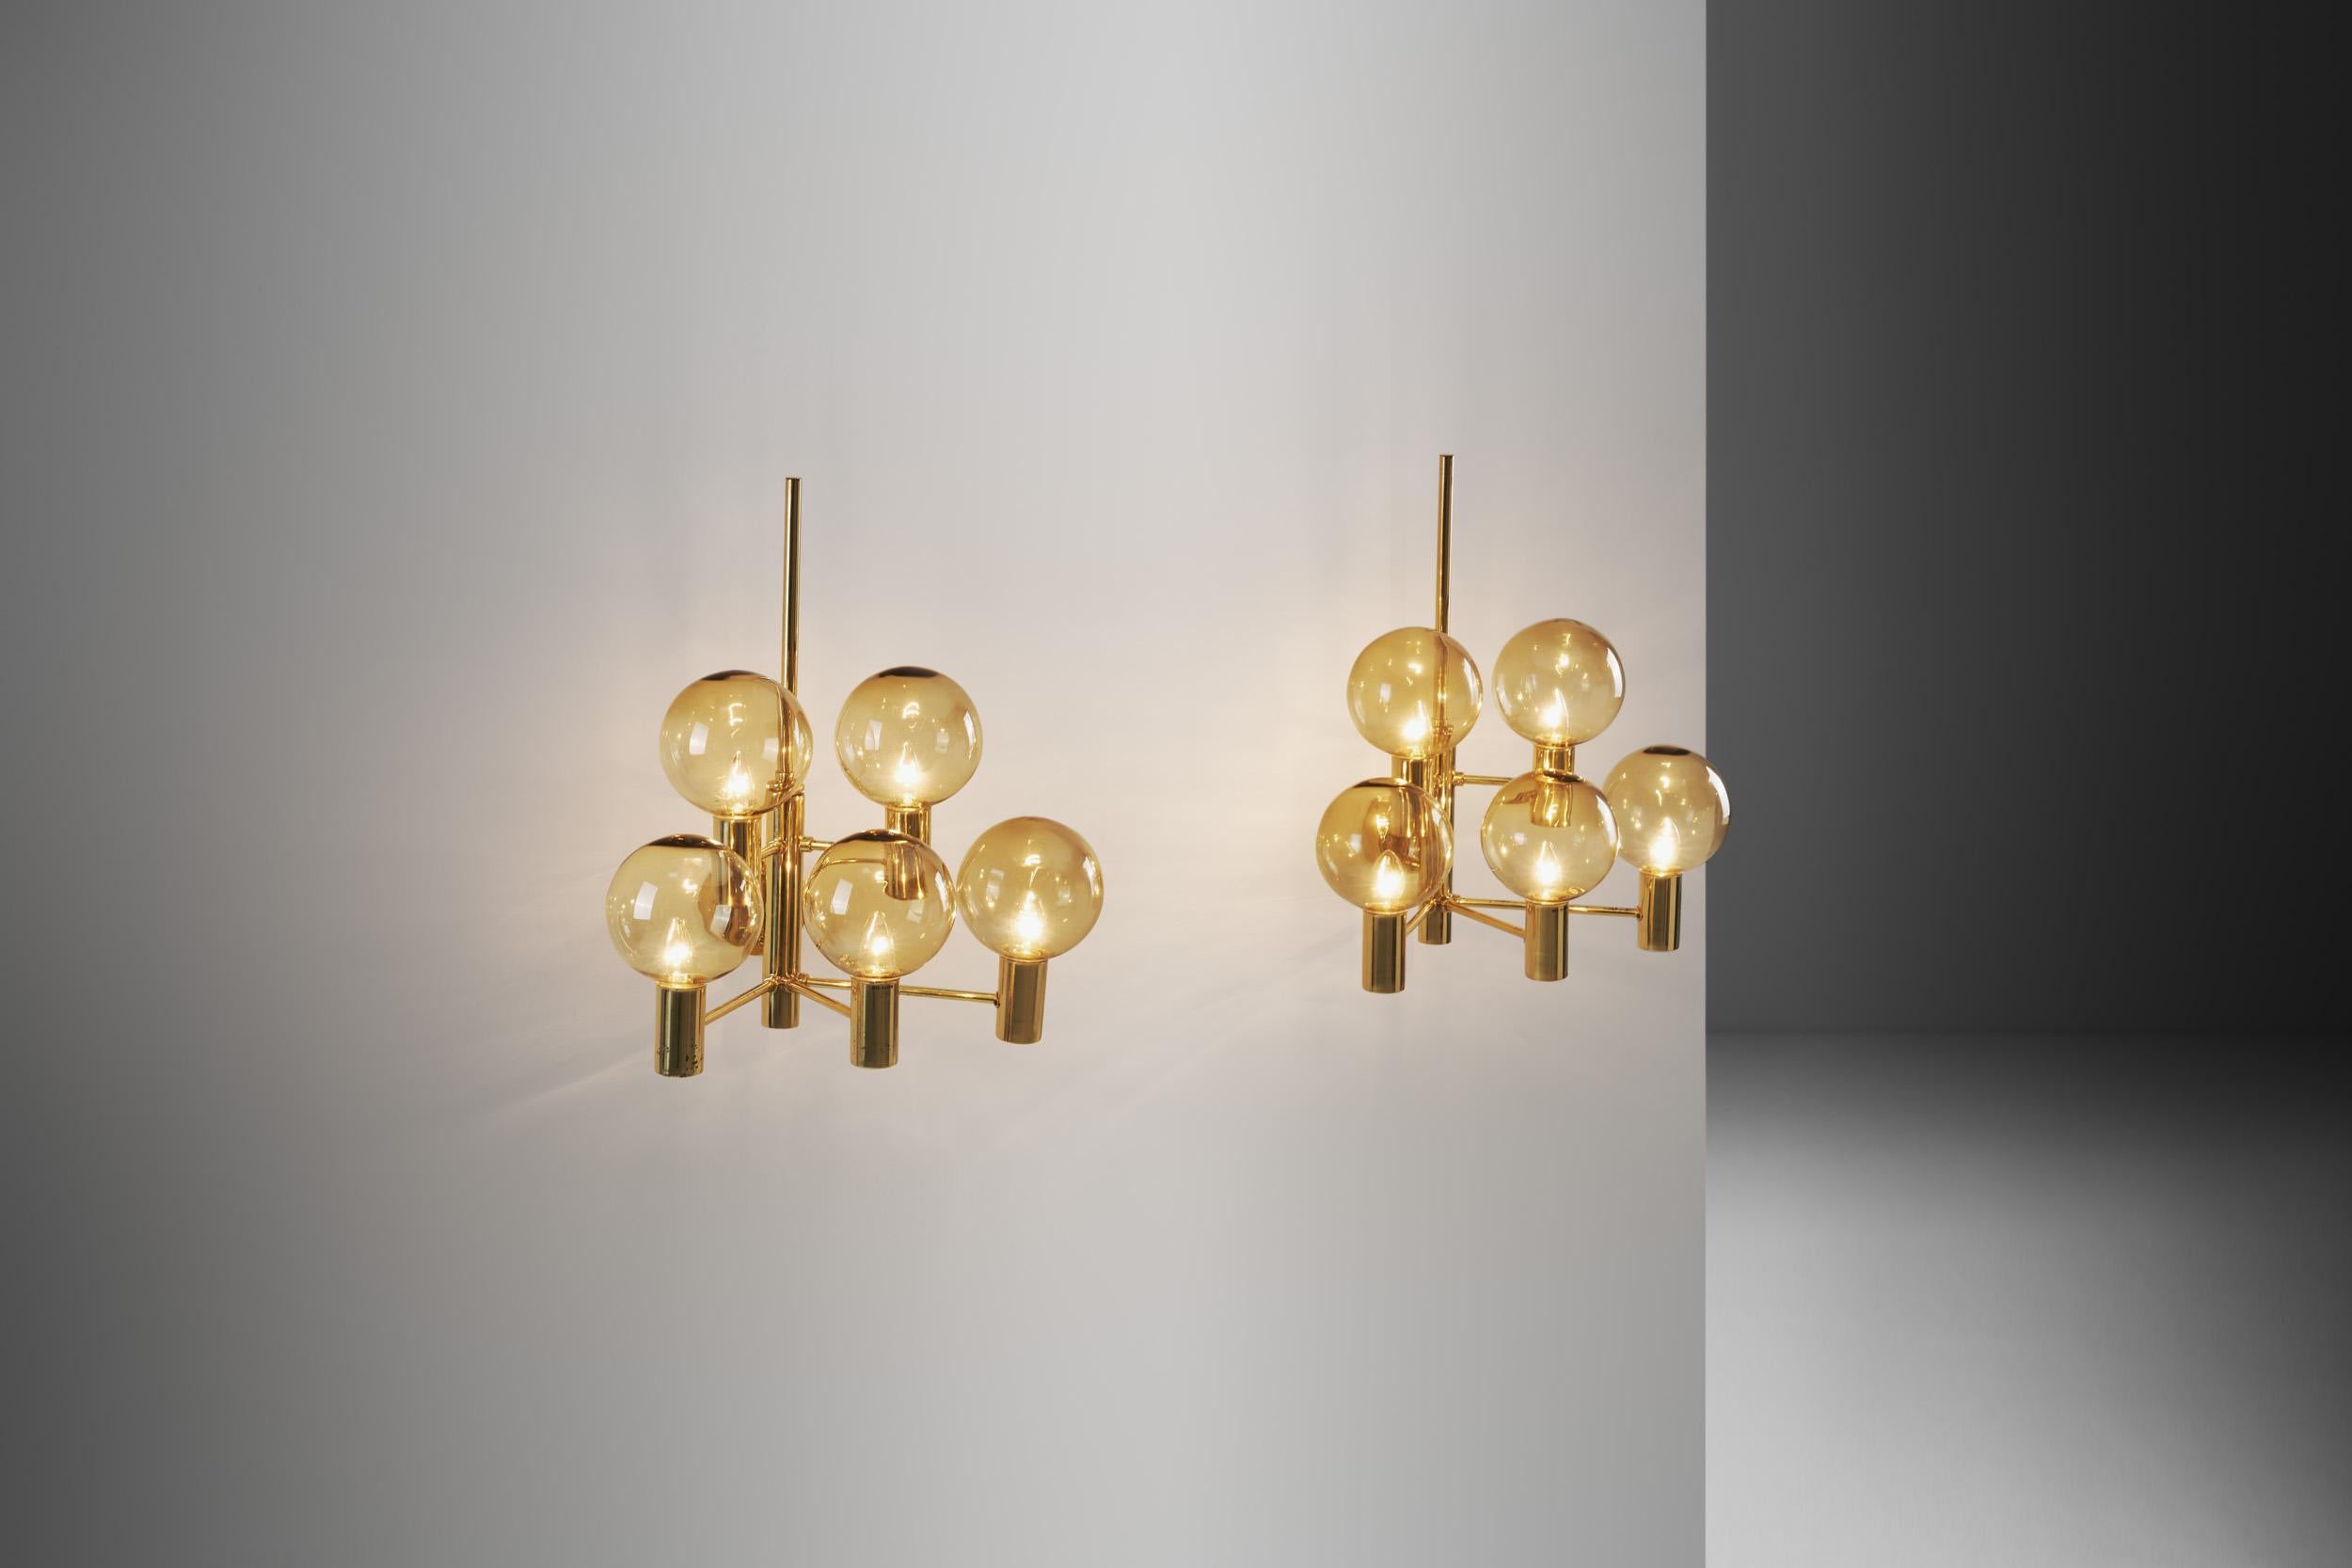 This pair of wall lamps is among the most stunning models of Jakobsson’s. With each brass frame holding five smoked, translucent glass shades, these lamps are the upgraded, larger version of the model V 149/3. The design clearly shows the Swedish